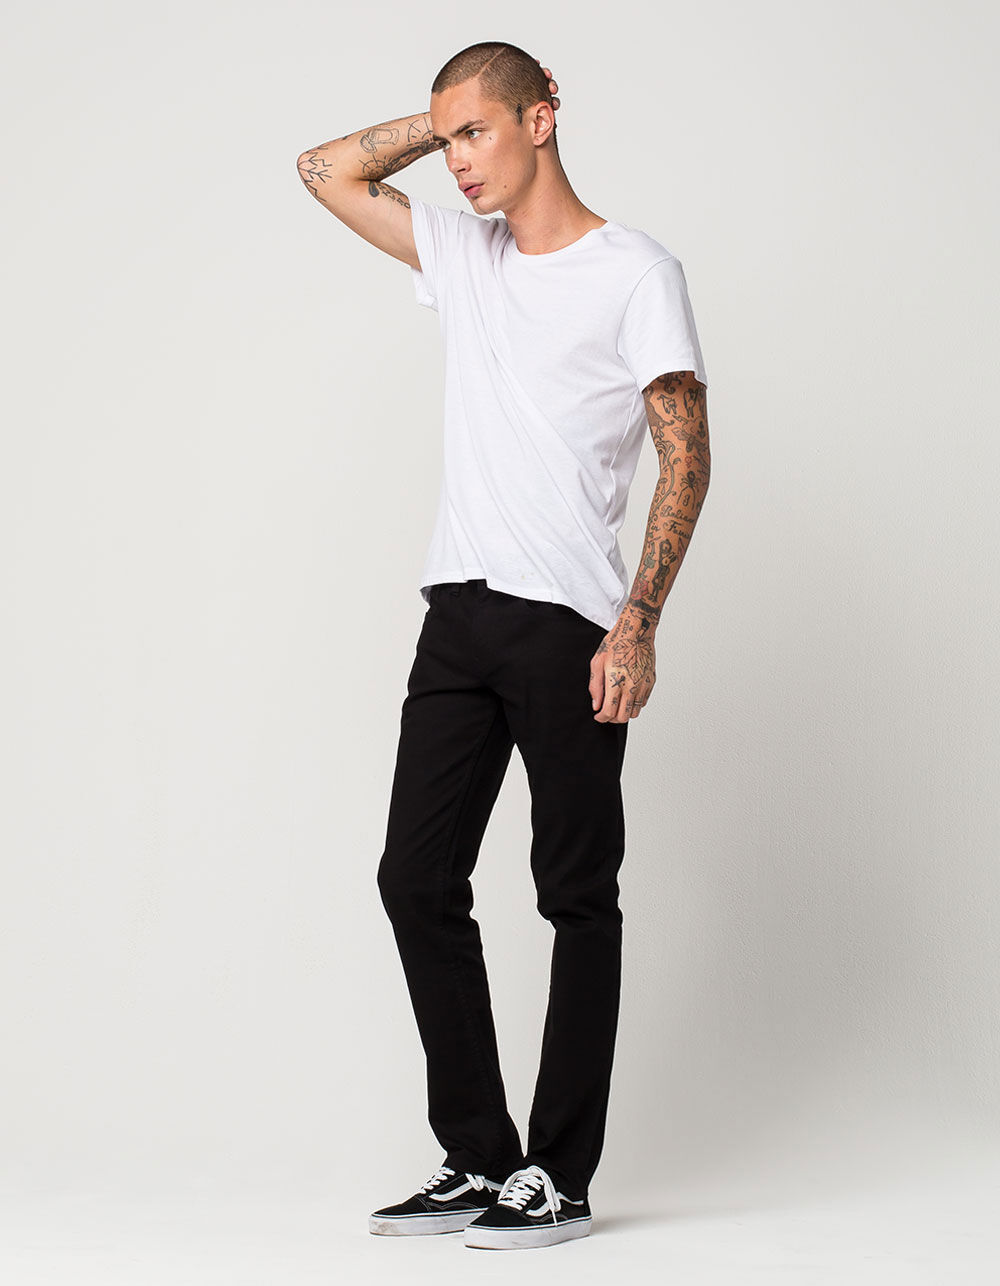 RSQ Mens Slim Straight Stretch Jeans image number 1